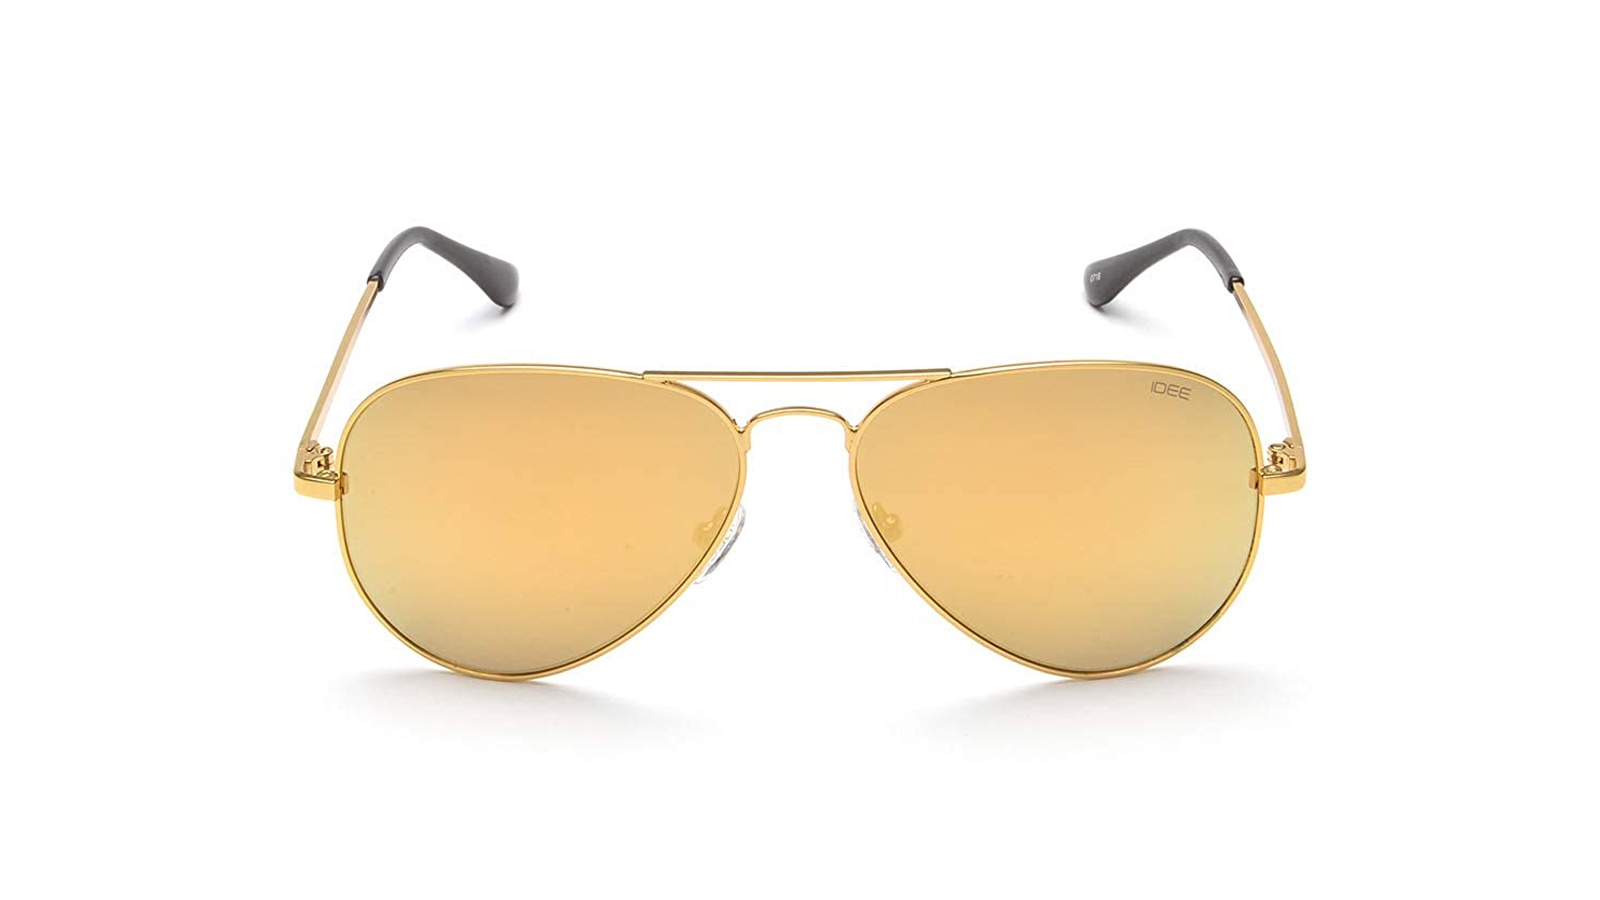 Designer Unisex Gold Aviator Sunglasses With Classic Attitude Perfect For  Outdoor Beach Activities Z0259U Mix Of Color Options And Signature Options  From Chengcheng8888, $14.93